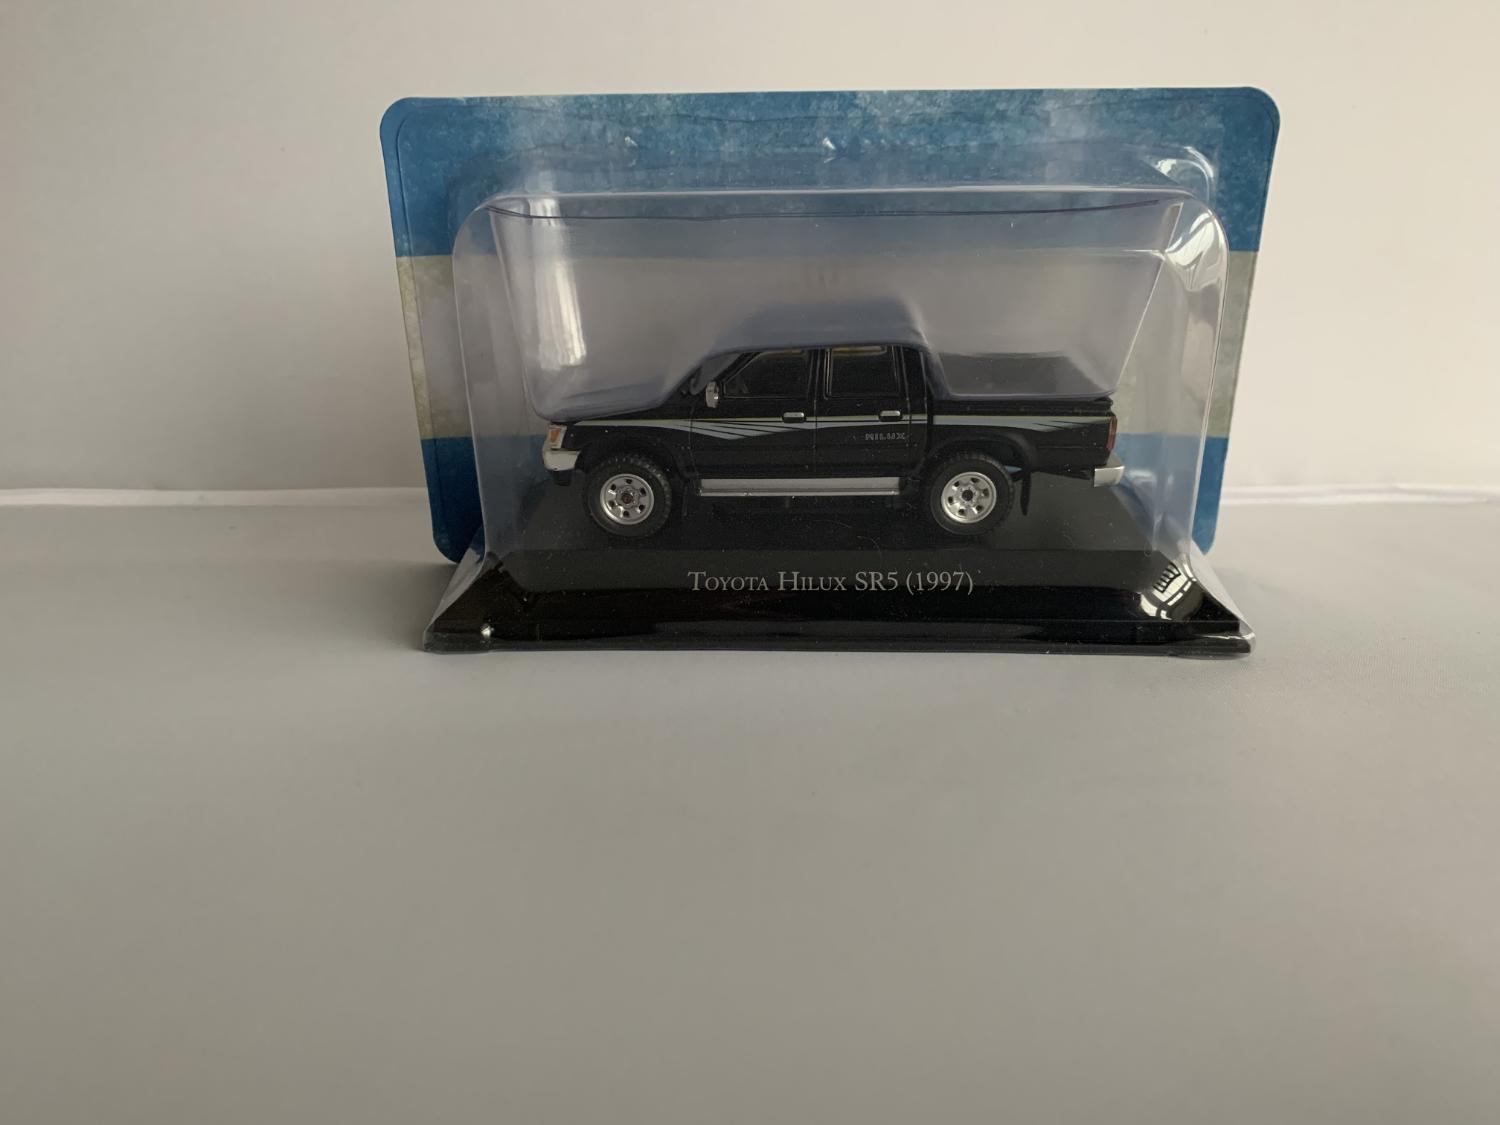 Toyota Hilux SR5 1997 in black 1:43 scale model from 80/90’s collection